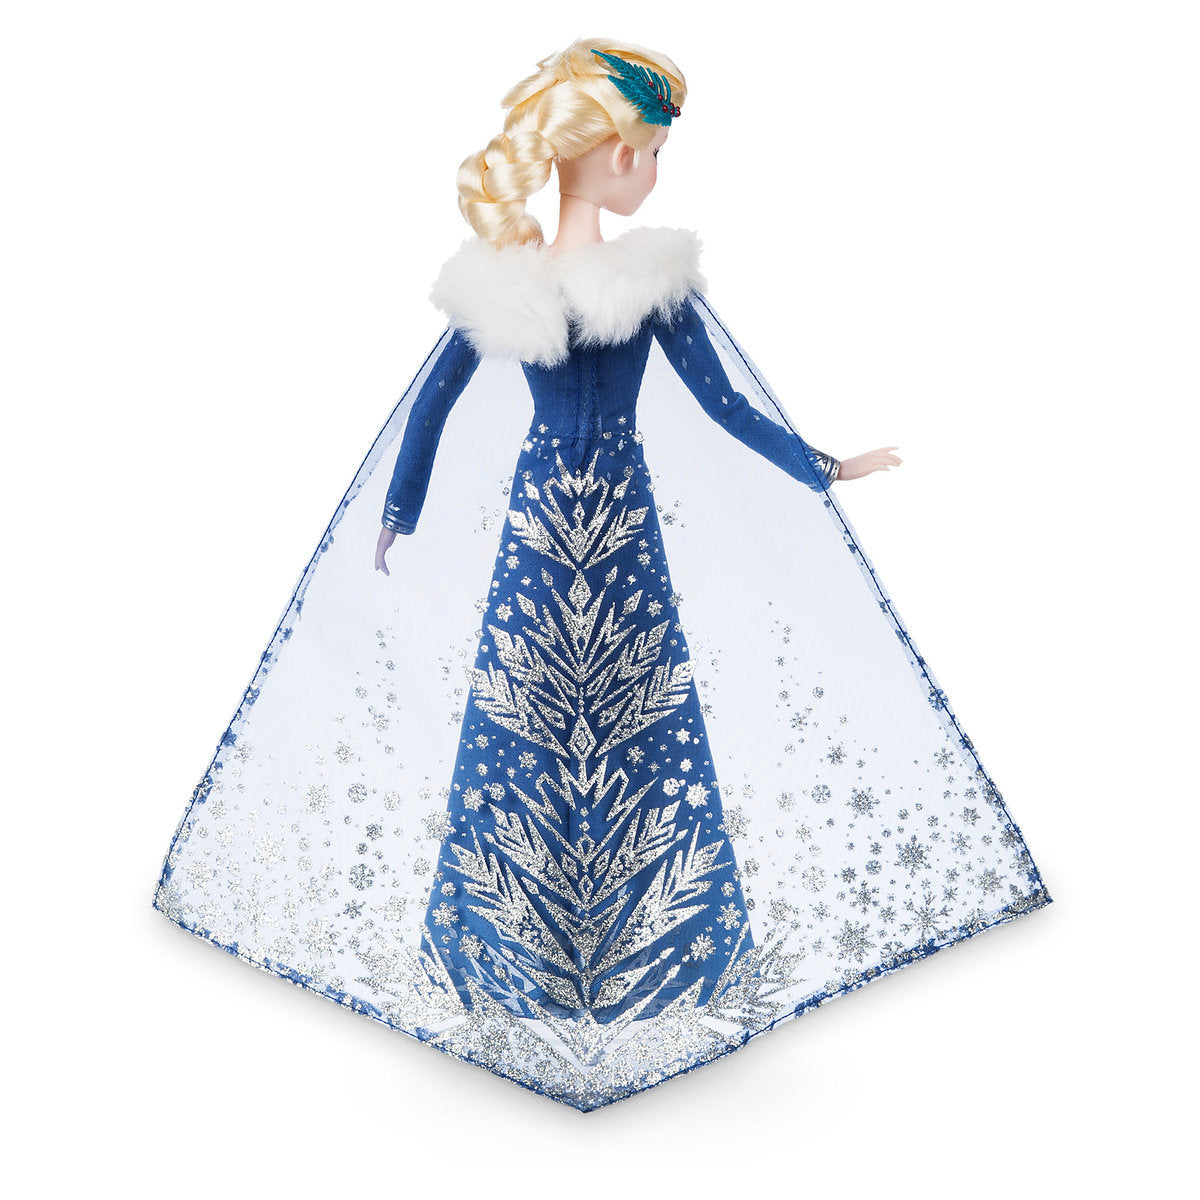 Disney Princess Frozen Elsa Singing Doll When We're Together New with Box